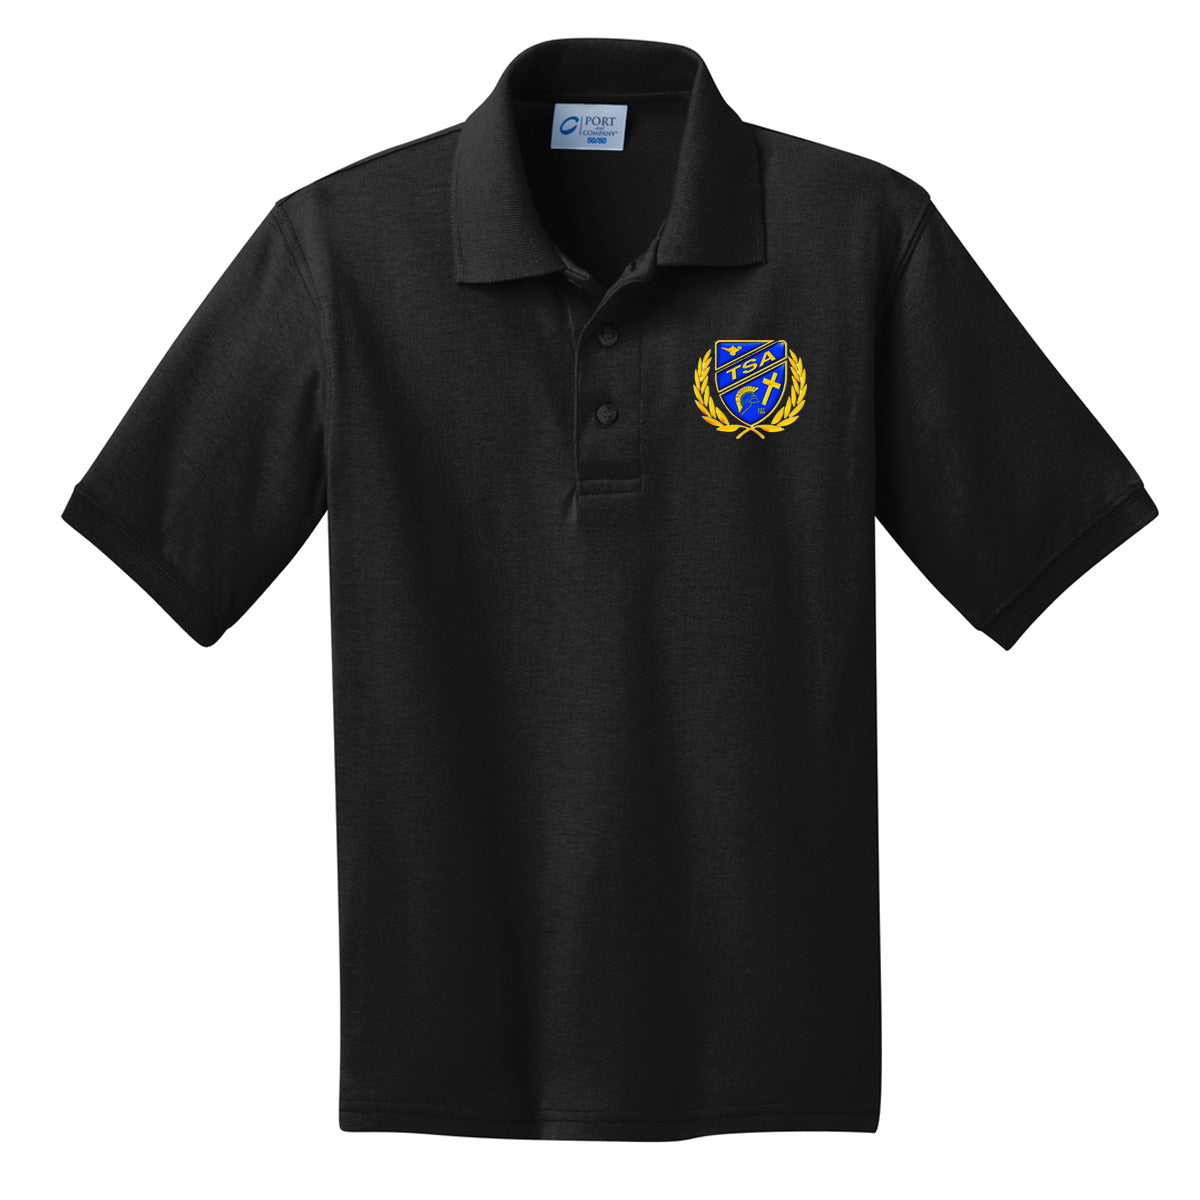 Tattnall - Adult Polo with Crest - Black (KP55) - Southern Grace Creations